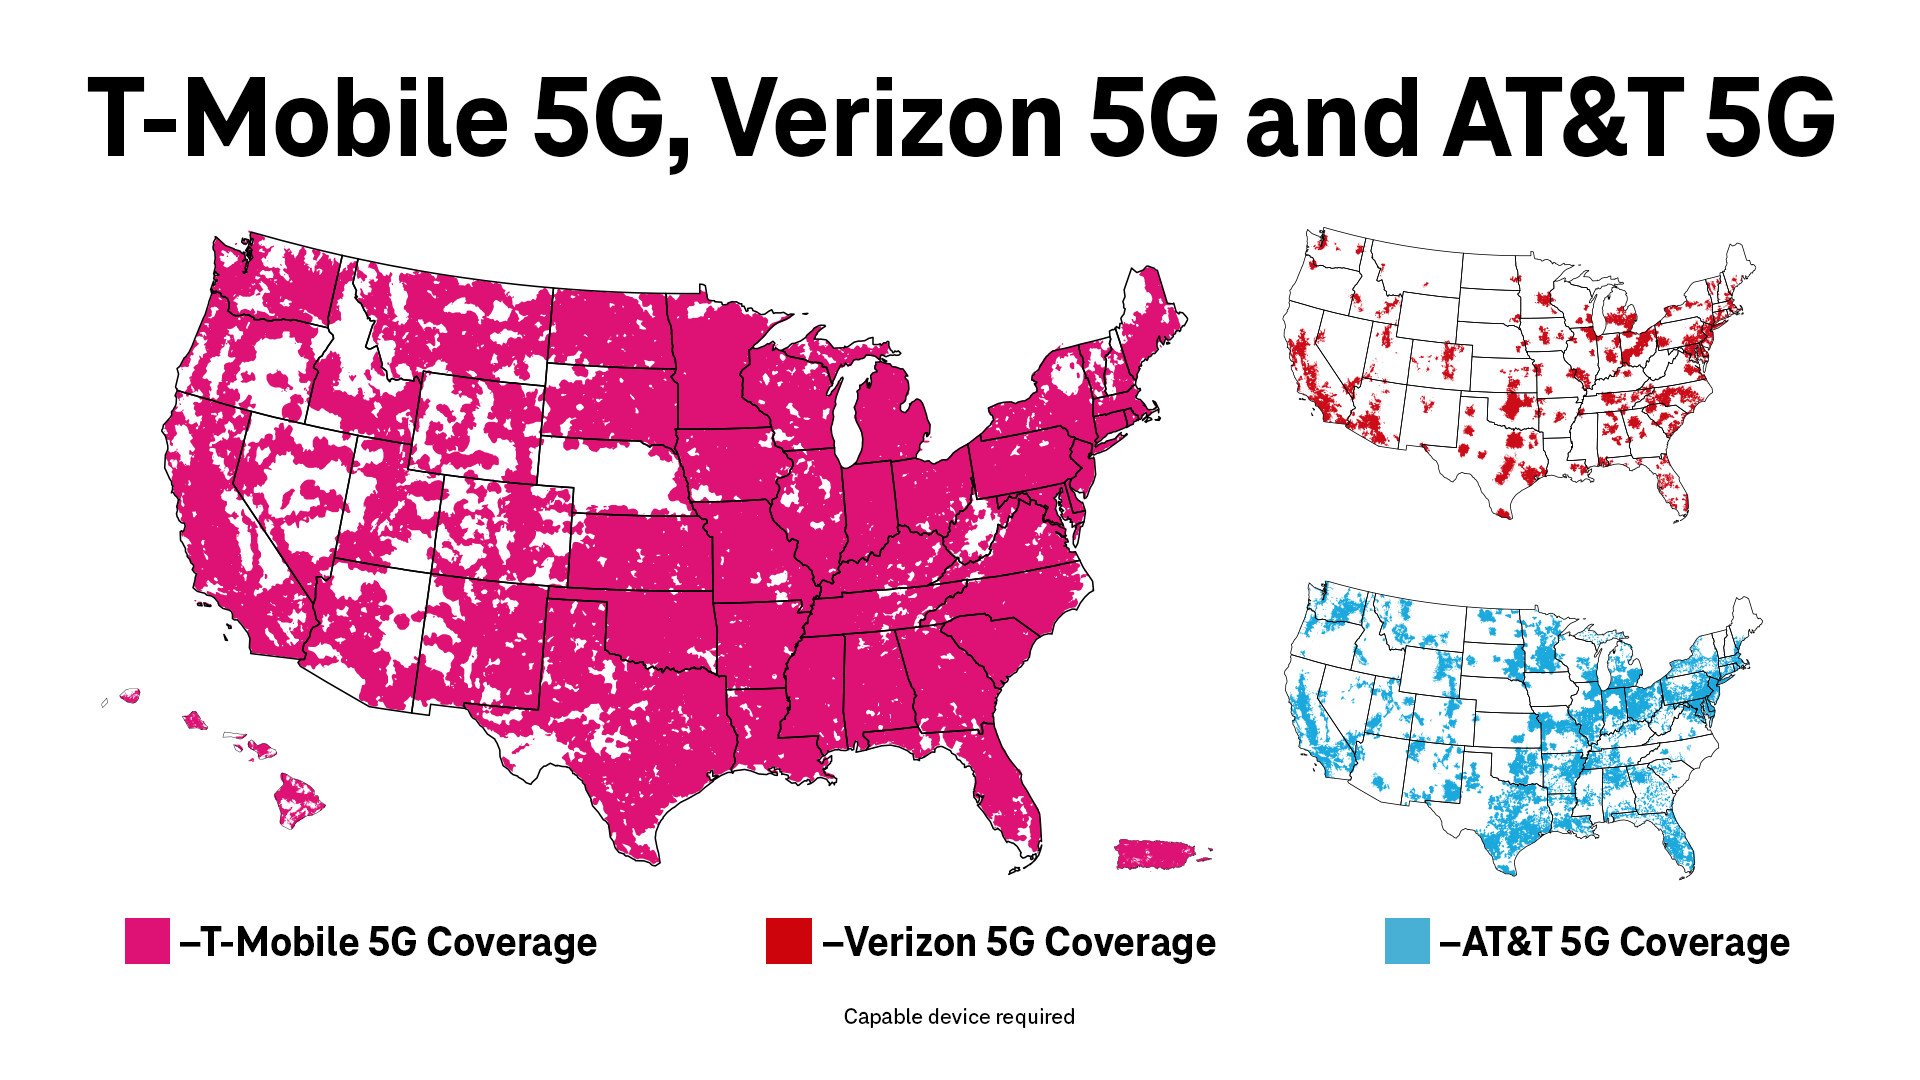 TMobile 5G reaches 300 million people covered six months ahead of